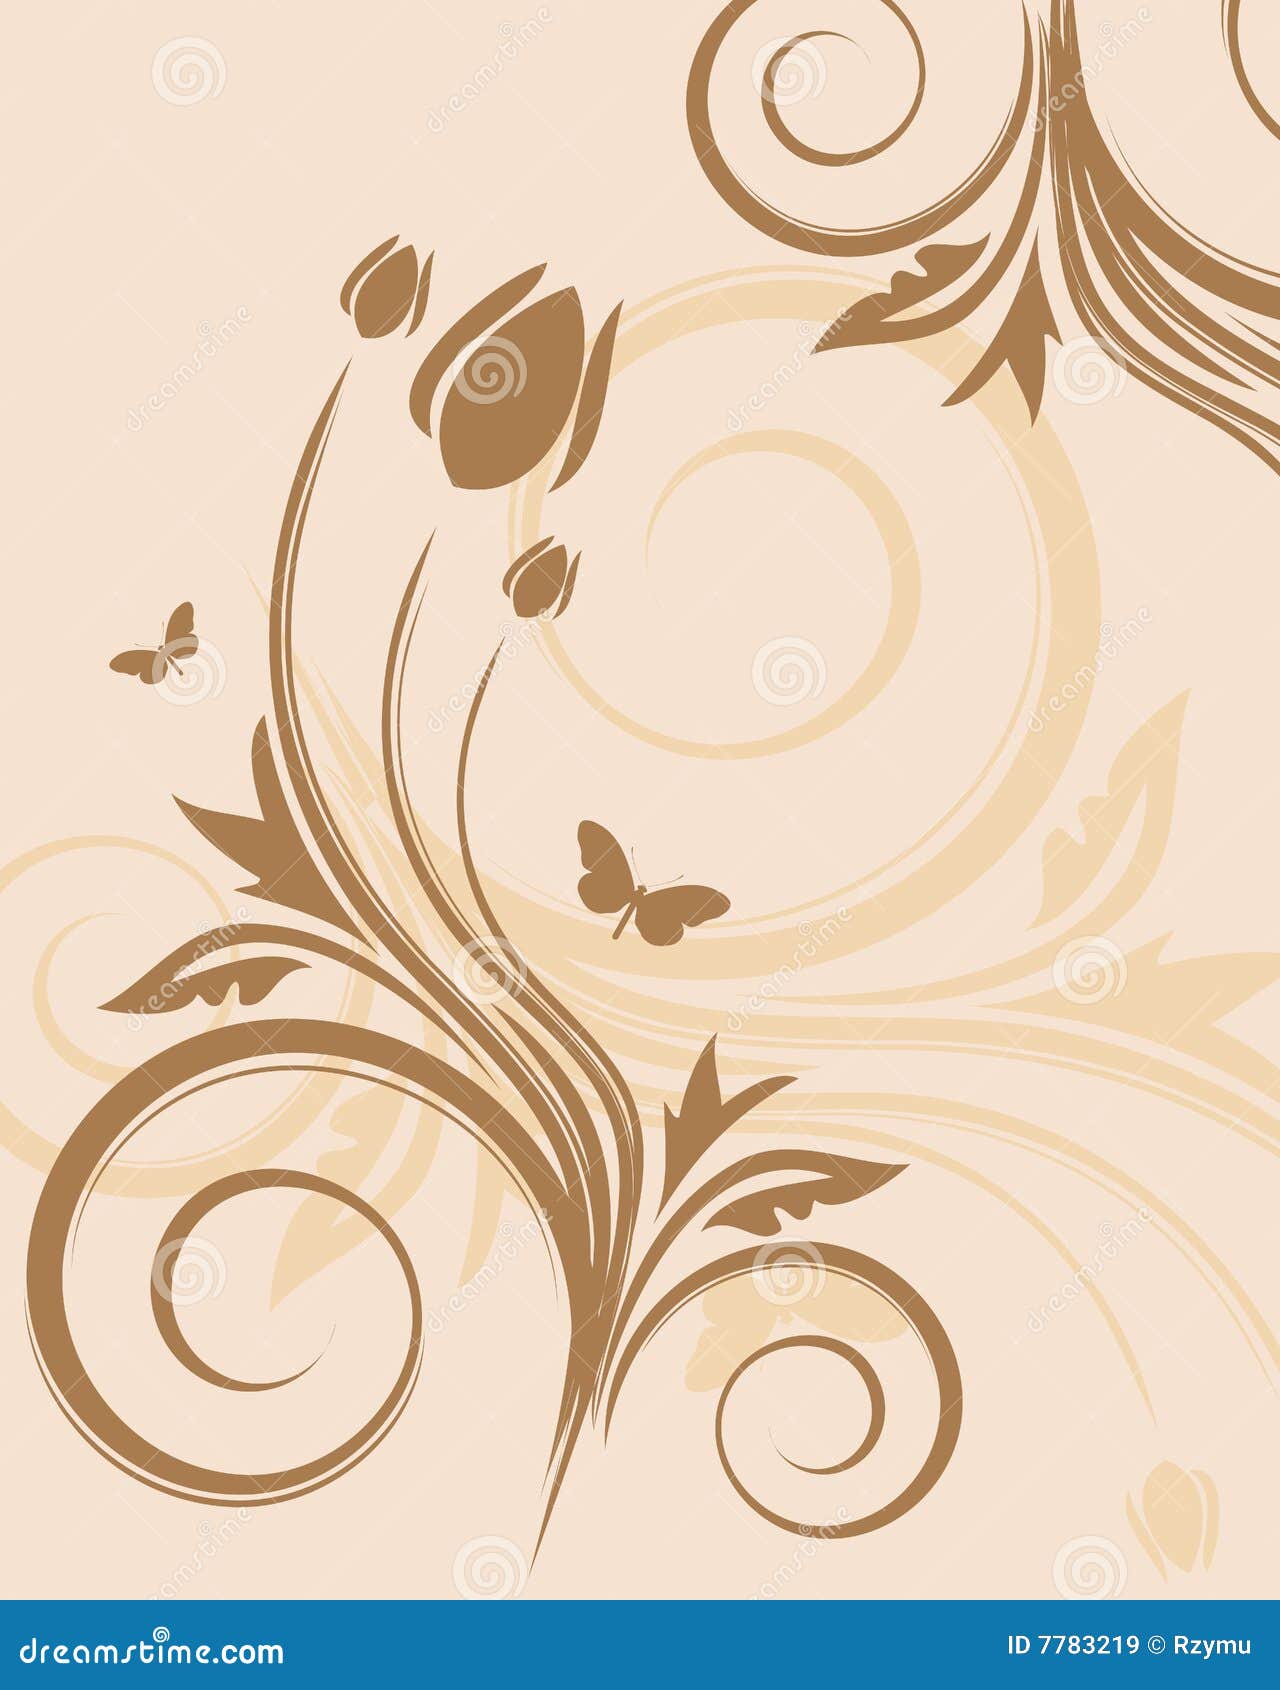 Brown, floral background stock vector. Illustration of scroll - 7783219